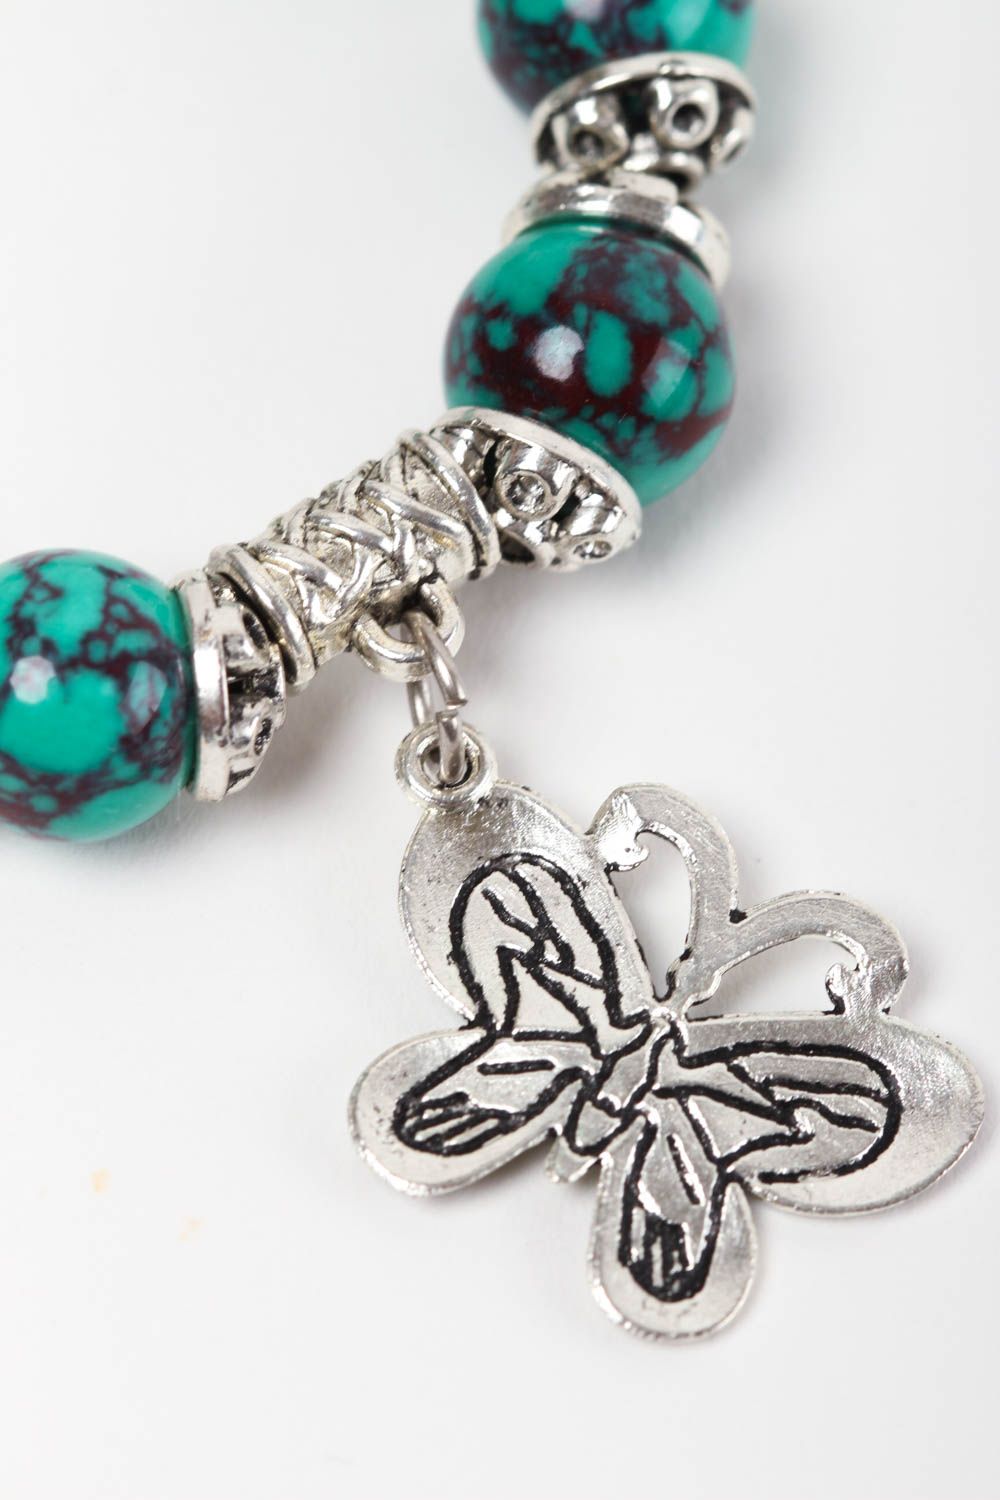 Natural turquoise stone beaded wrist bracelet with metal charms and central butterfly charm photo 3